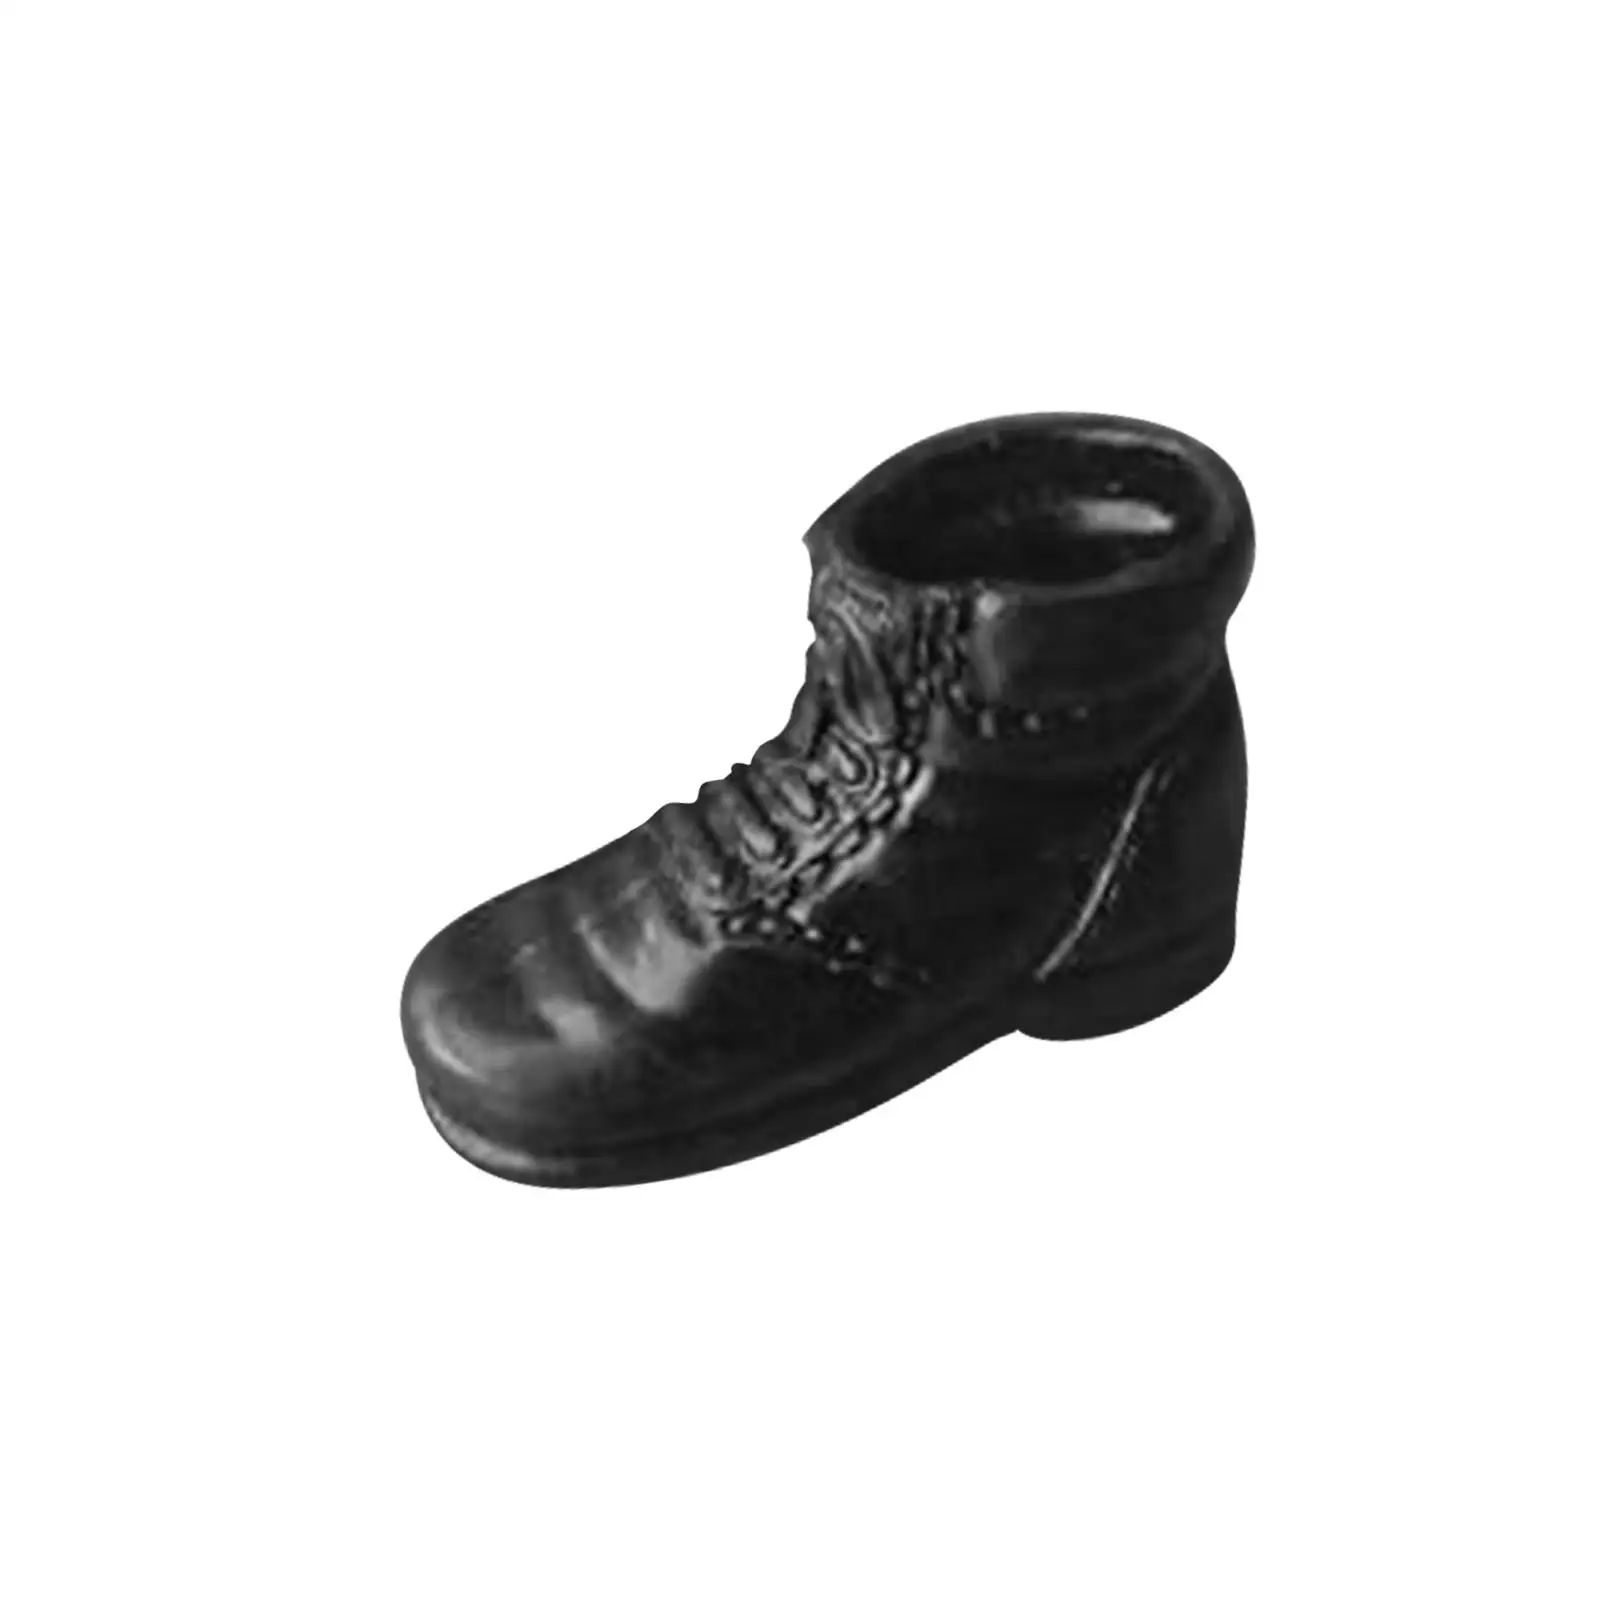 1/6 Scale Ankle Bootie Fashion Stylish Cosplay Casual Miniature Soldier Costume for 12`` Female Dolls Soldier Figure Costume